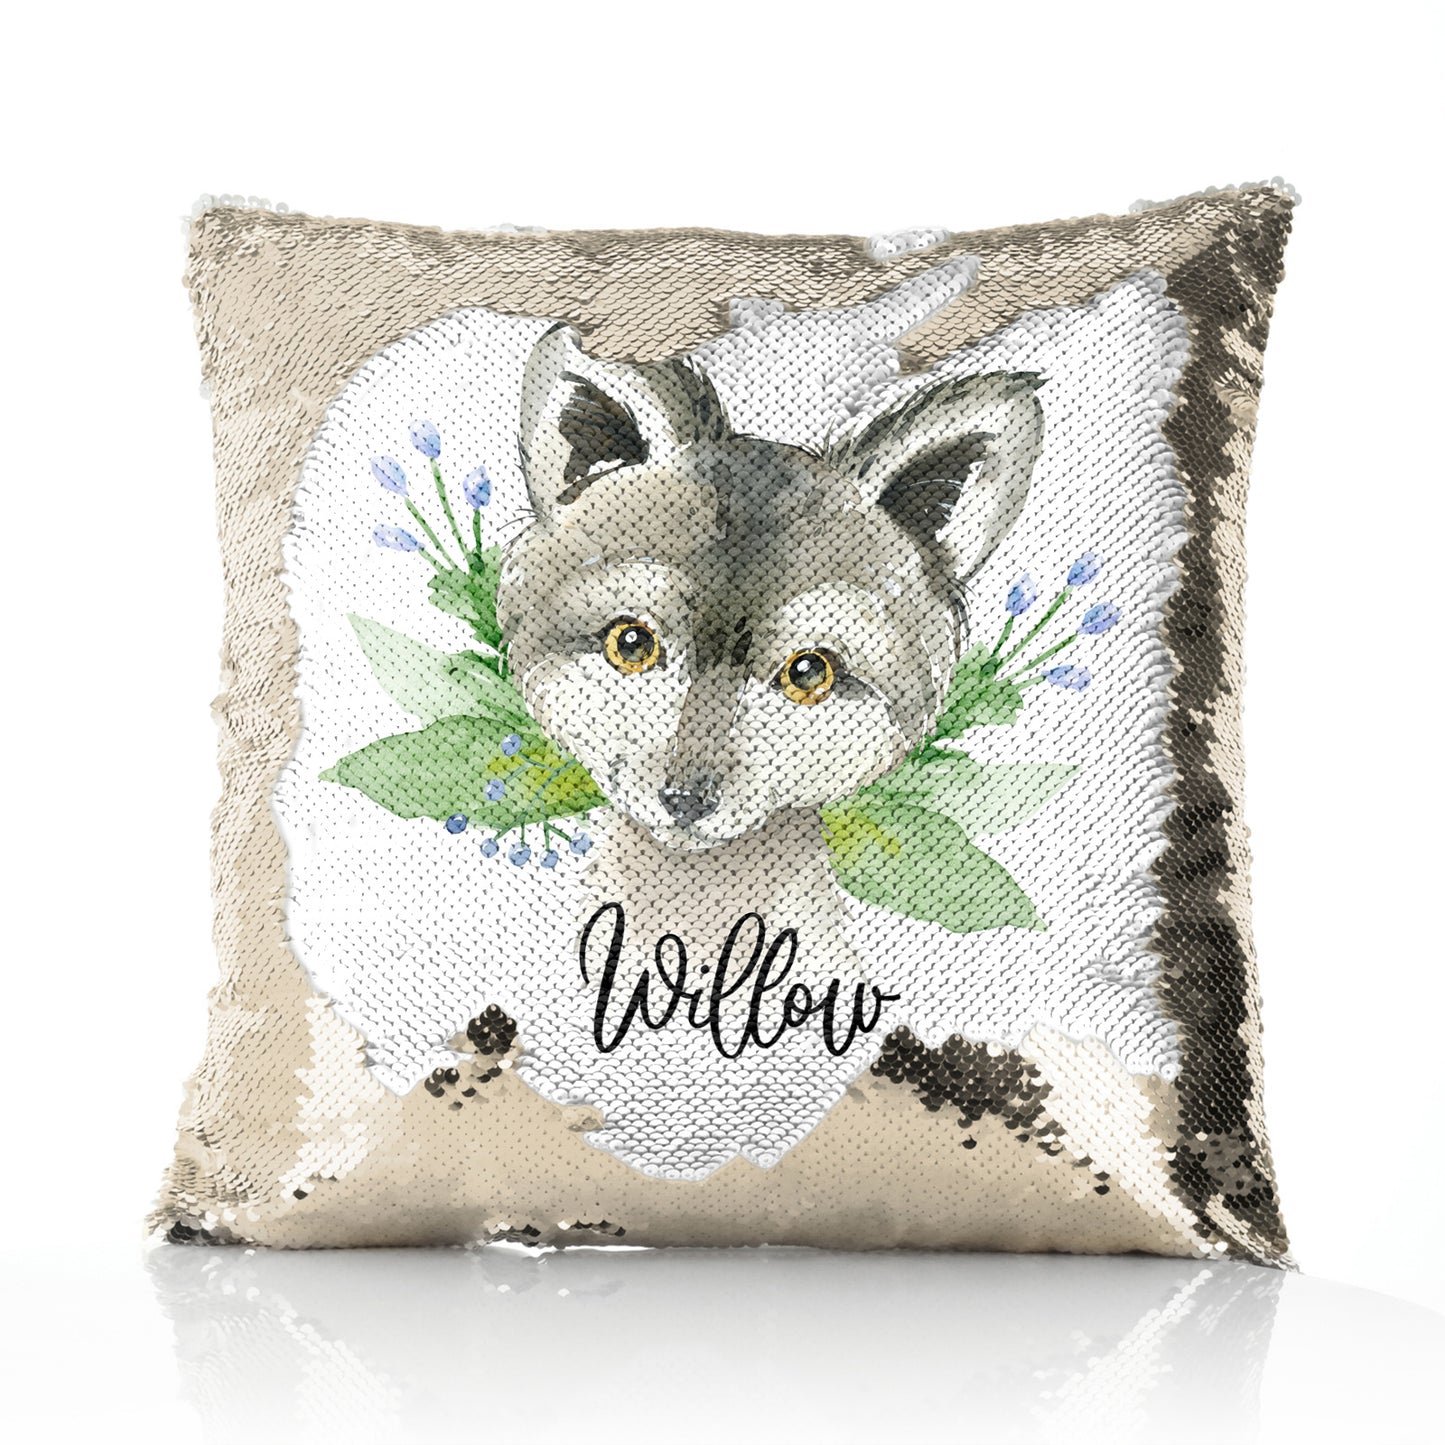 Personalised Sequin Cushion with Grey Wolf Blue Flowers and Cute Text